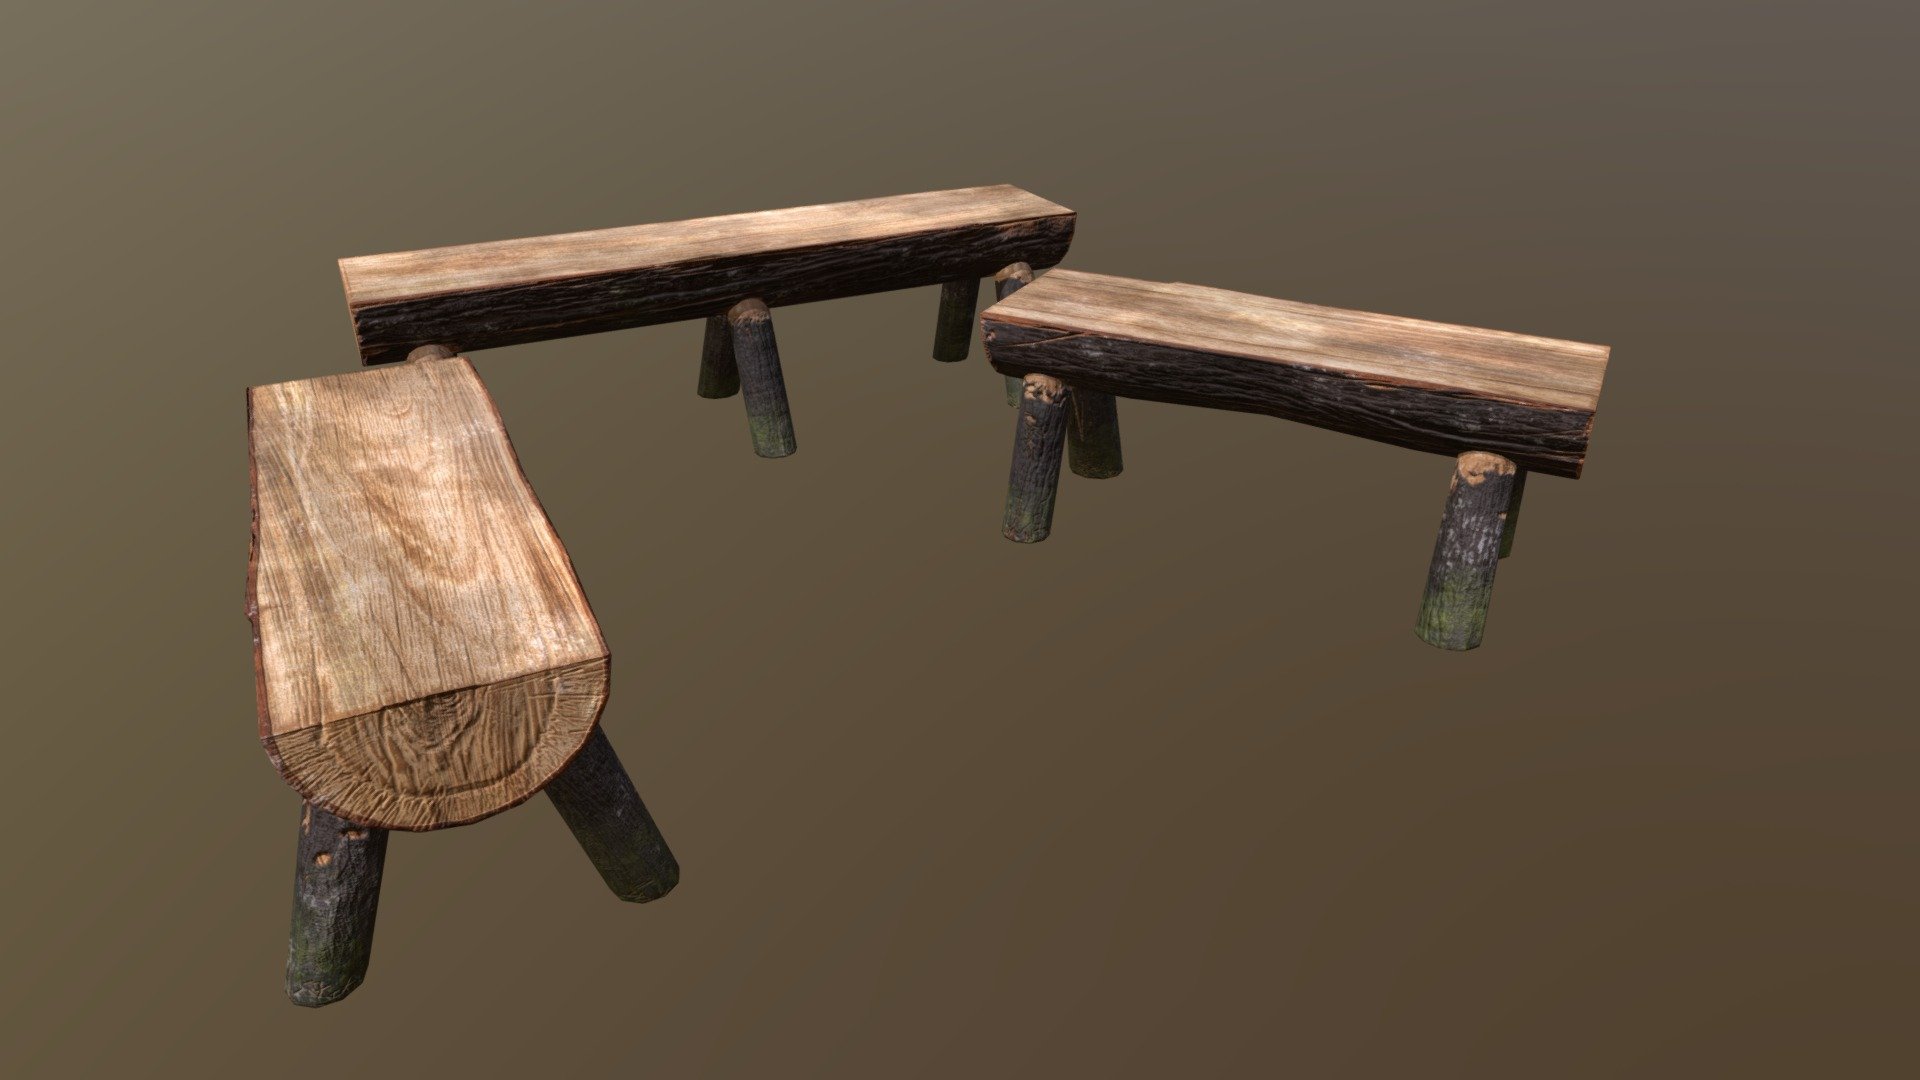 Log Made Wood Benches 3D Model. This model contains the Log Made Wood Benches itself 

All modeled in Maya, textured with Substance Painter.

The model was built to scale and is UV unwrapped properly. Contains only ONE texture set.

⦁   2516 tris. 

⦁   Contains: .FBX .OBJ and .DAE

⦁   Model has clean topology. No Ngons.

⦁   Built to scale

⦁   Unwrapped UV Map

⦁   4K Texture set

⦁   High quality details

⦁   Based on real life references

⦁   Renders done in Marmoset Toolbag

Polycount: 

Verts 1292

Edges 2701

Faces 1443

Tris 2516

If you have any questions please feel free to ask me 3d model